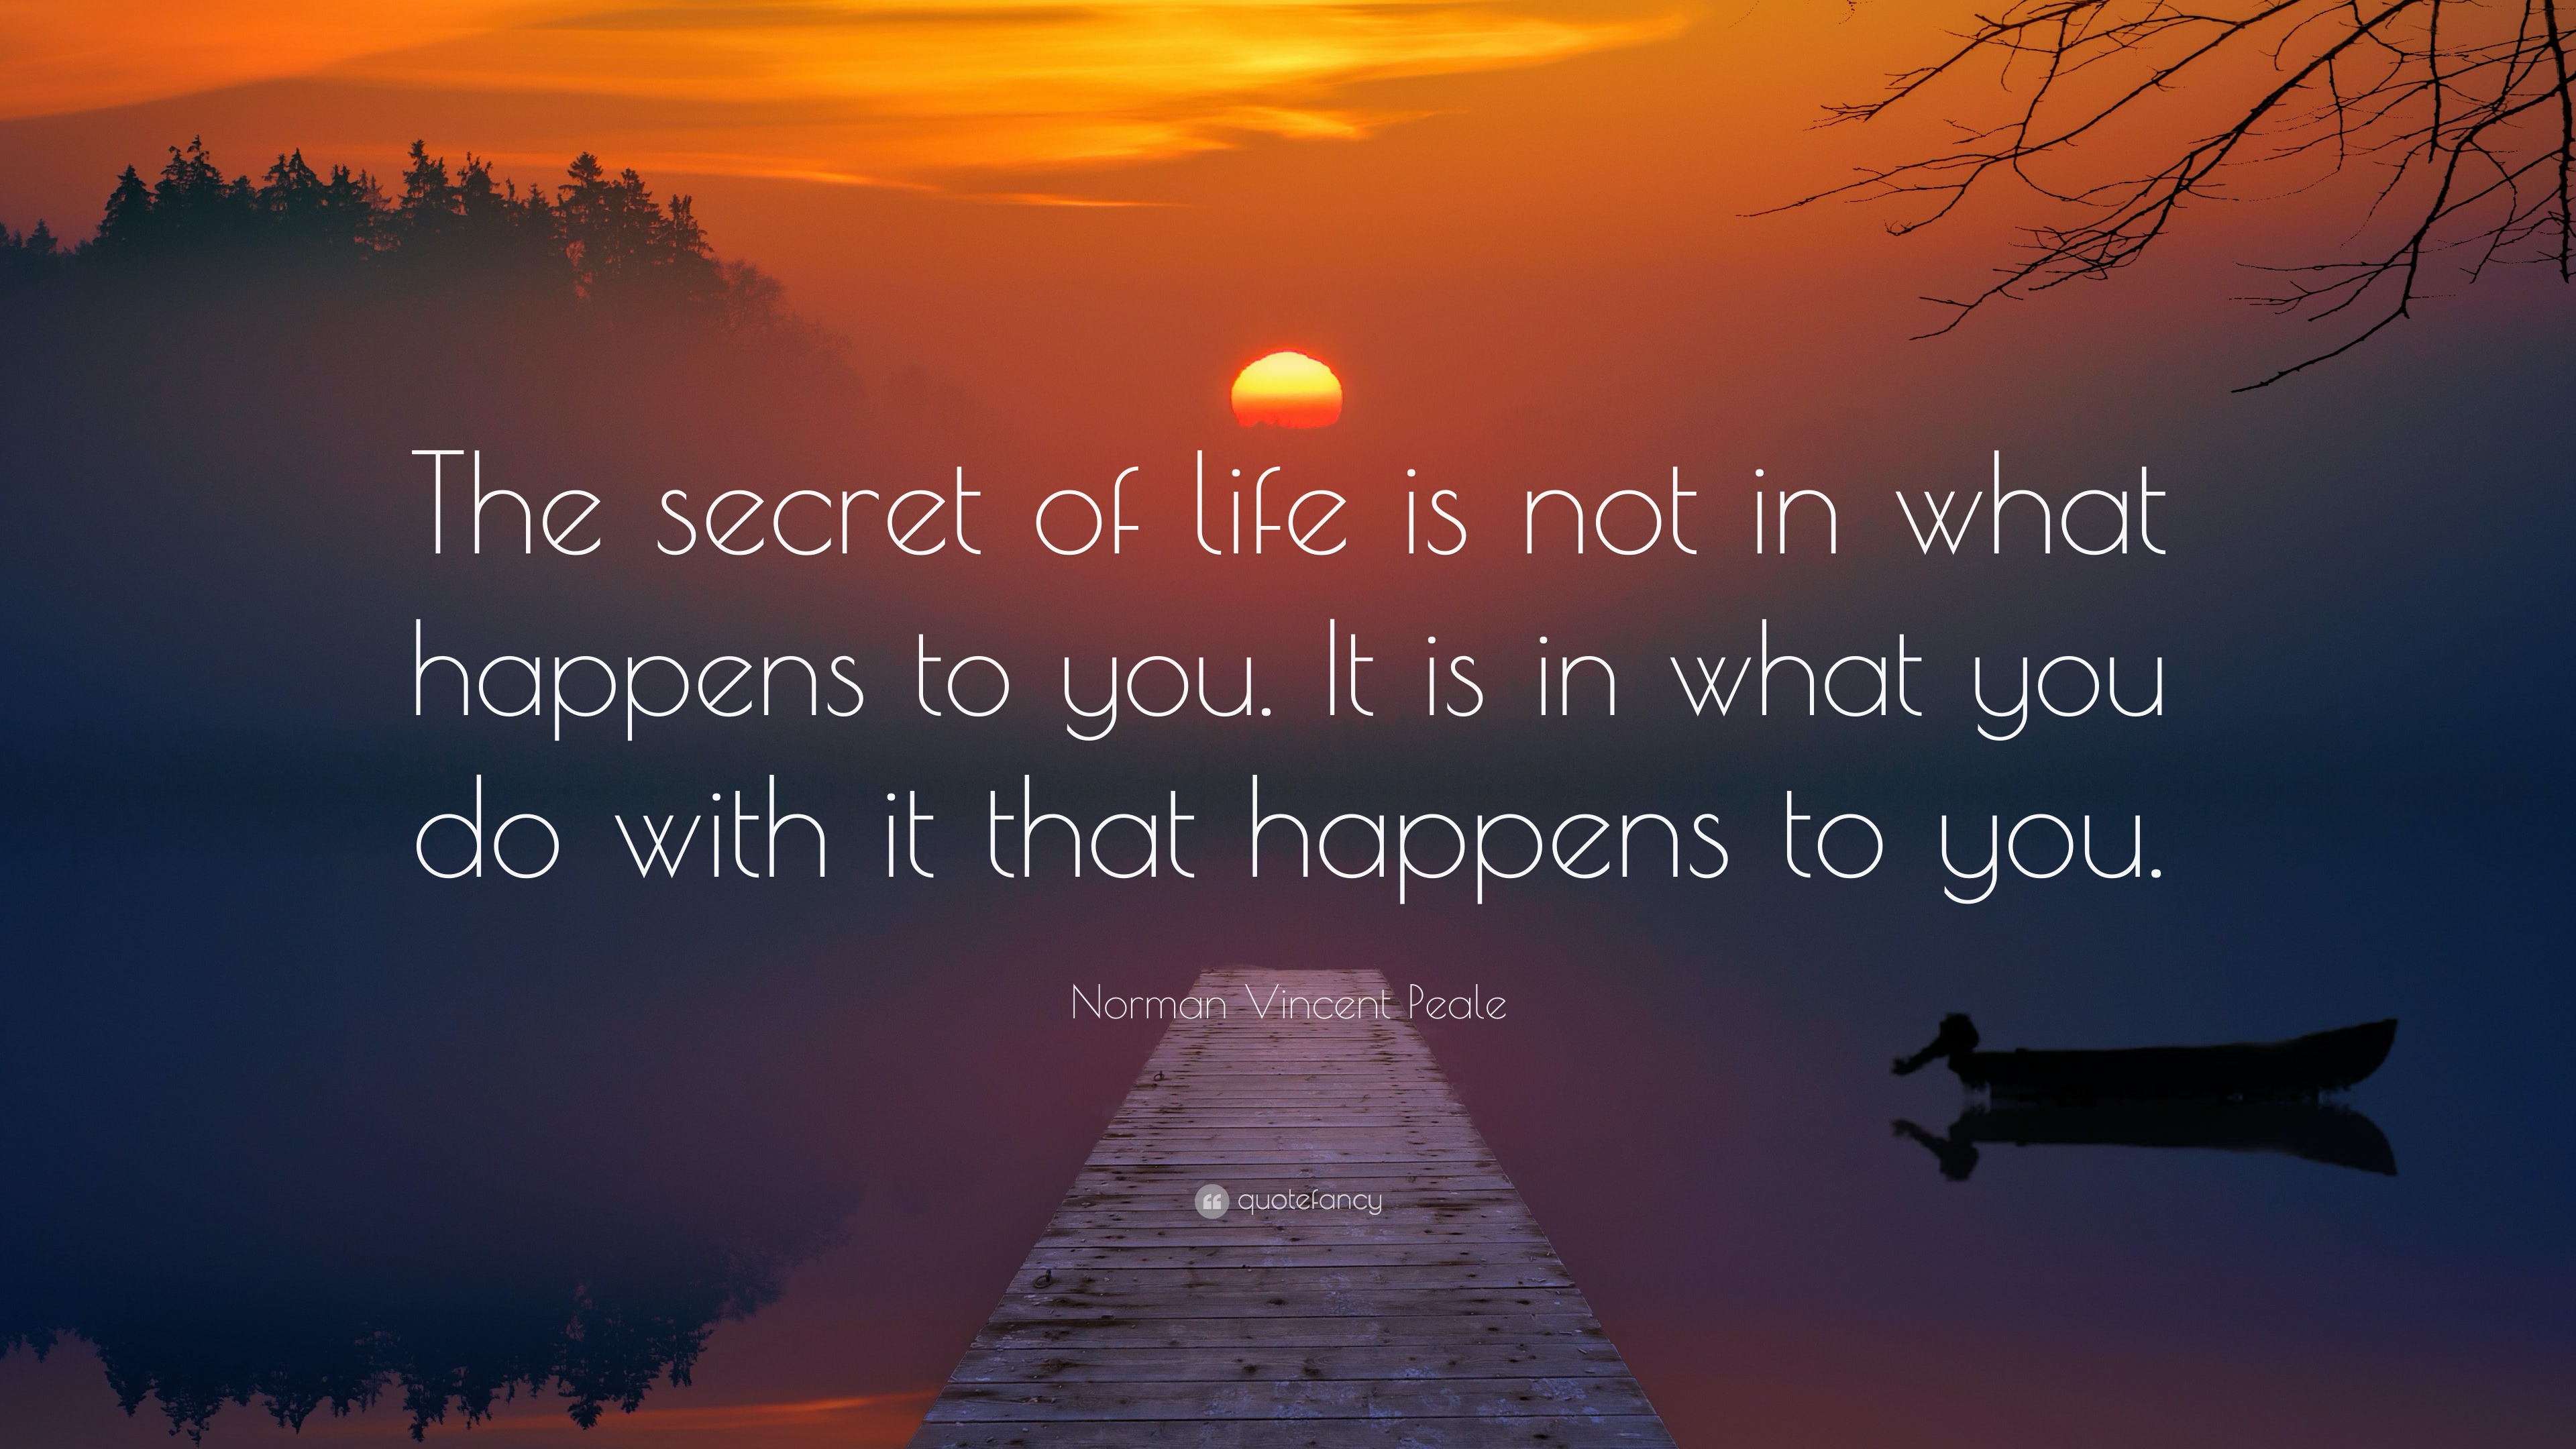 Norman Vincent Peale Quote: “The secret of life is not in what happens ...